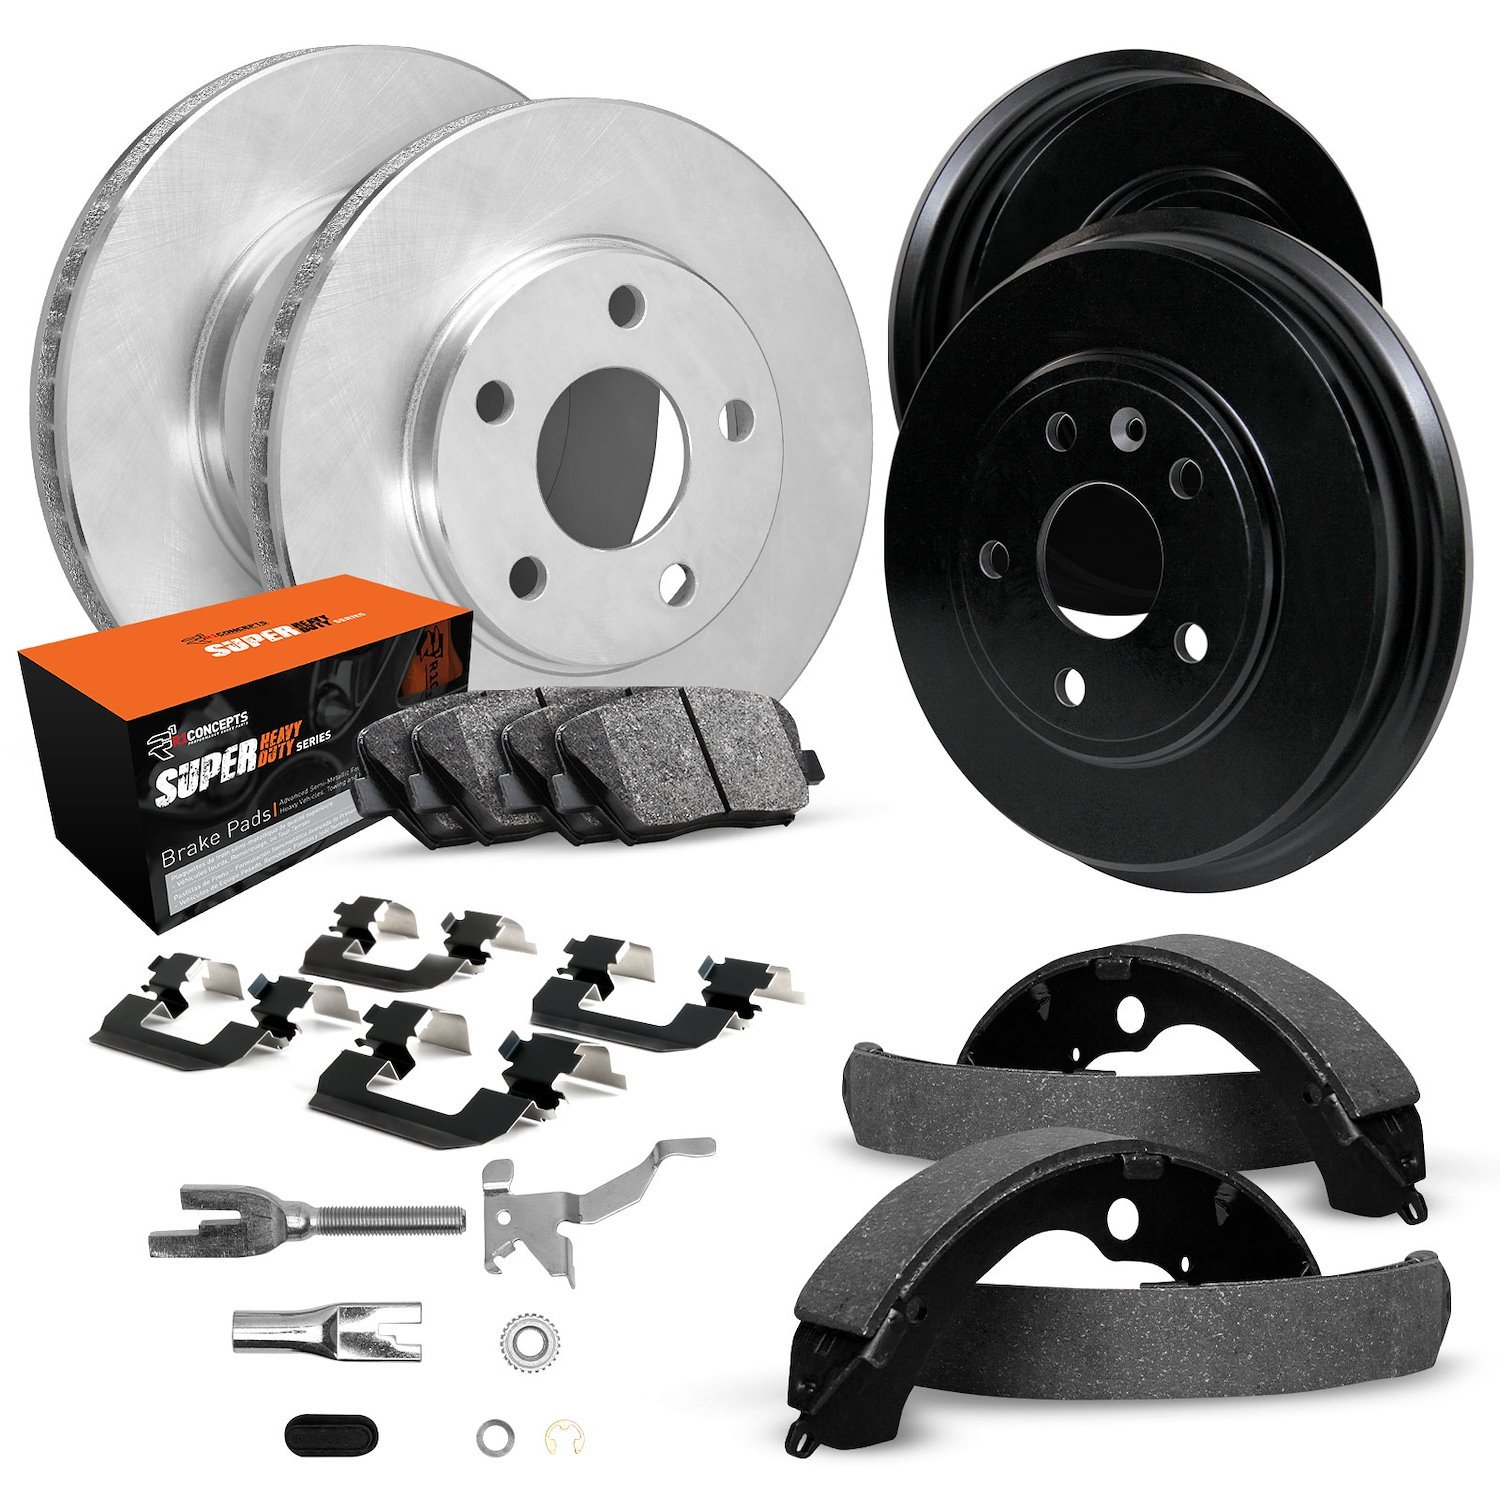 E-Line Blank Brake Rotor & Drum Set w/Super-Duty Pads, Shoes, Hardware, & Adjusters, 1978-1993 GM, Position: Front & Rear